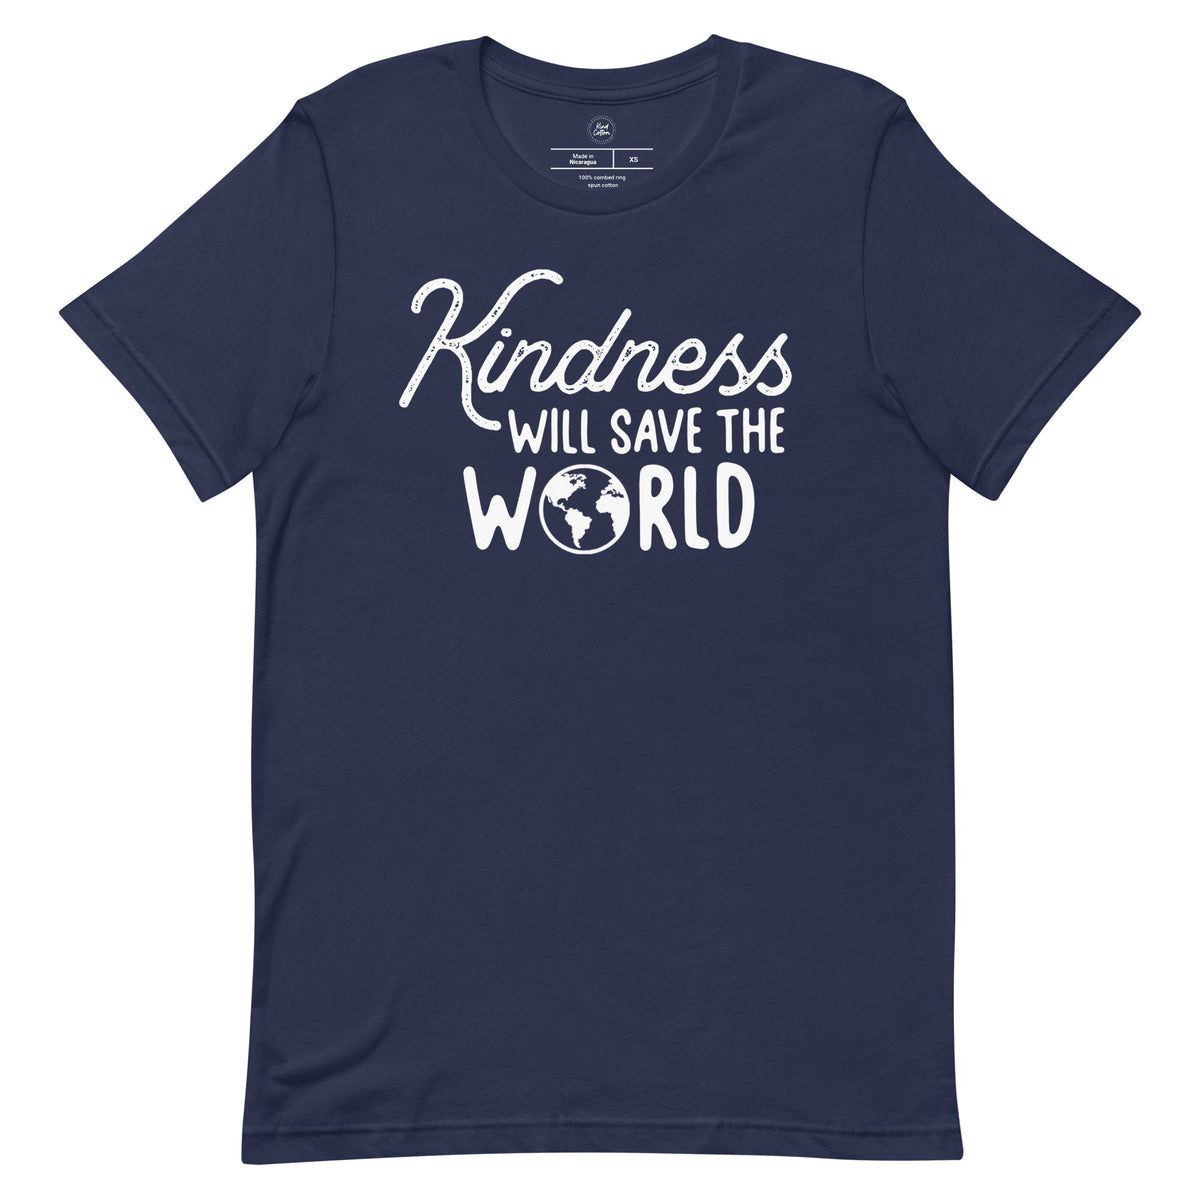 Highland Kindness will Save the World Classic Tee